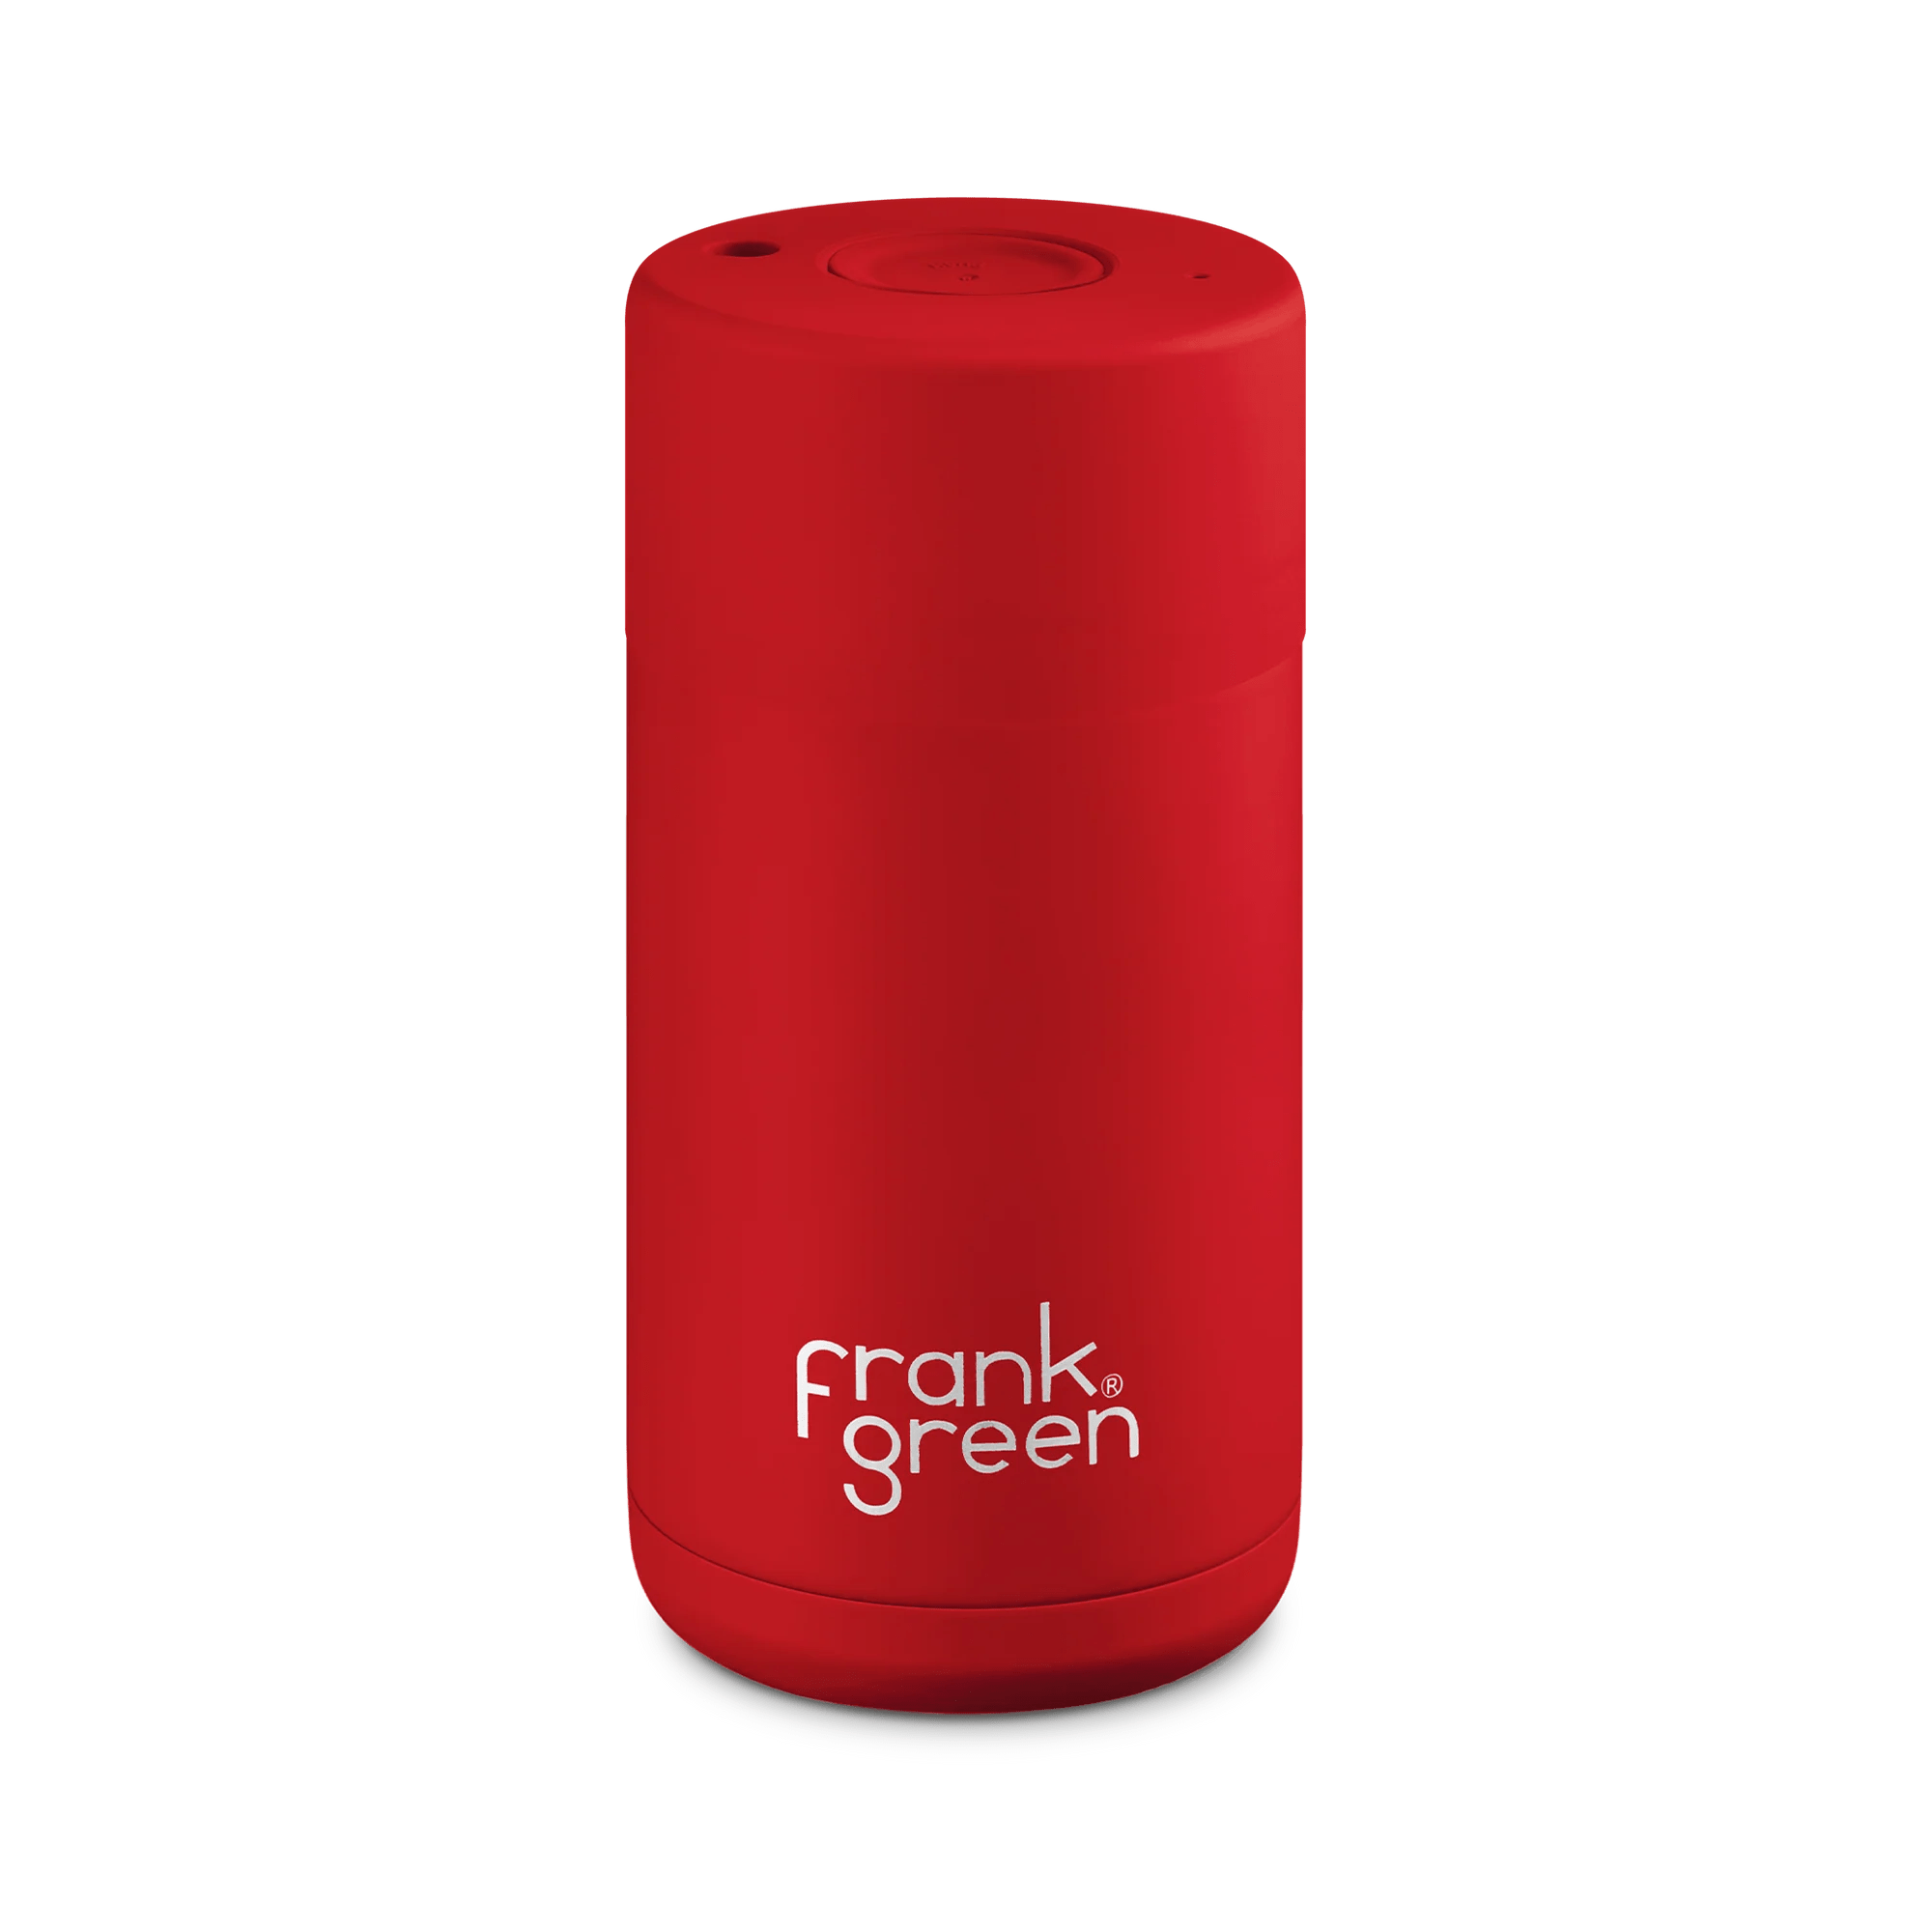 Frank Green - 12oz Ceramic Reusable Cup - The Flower Crate